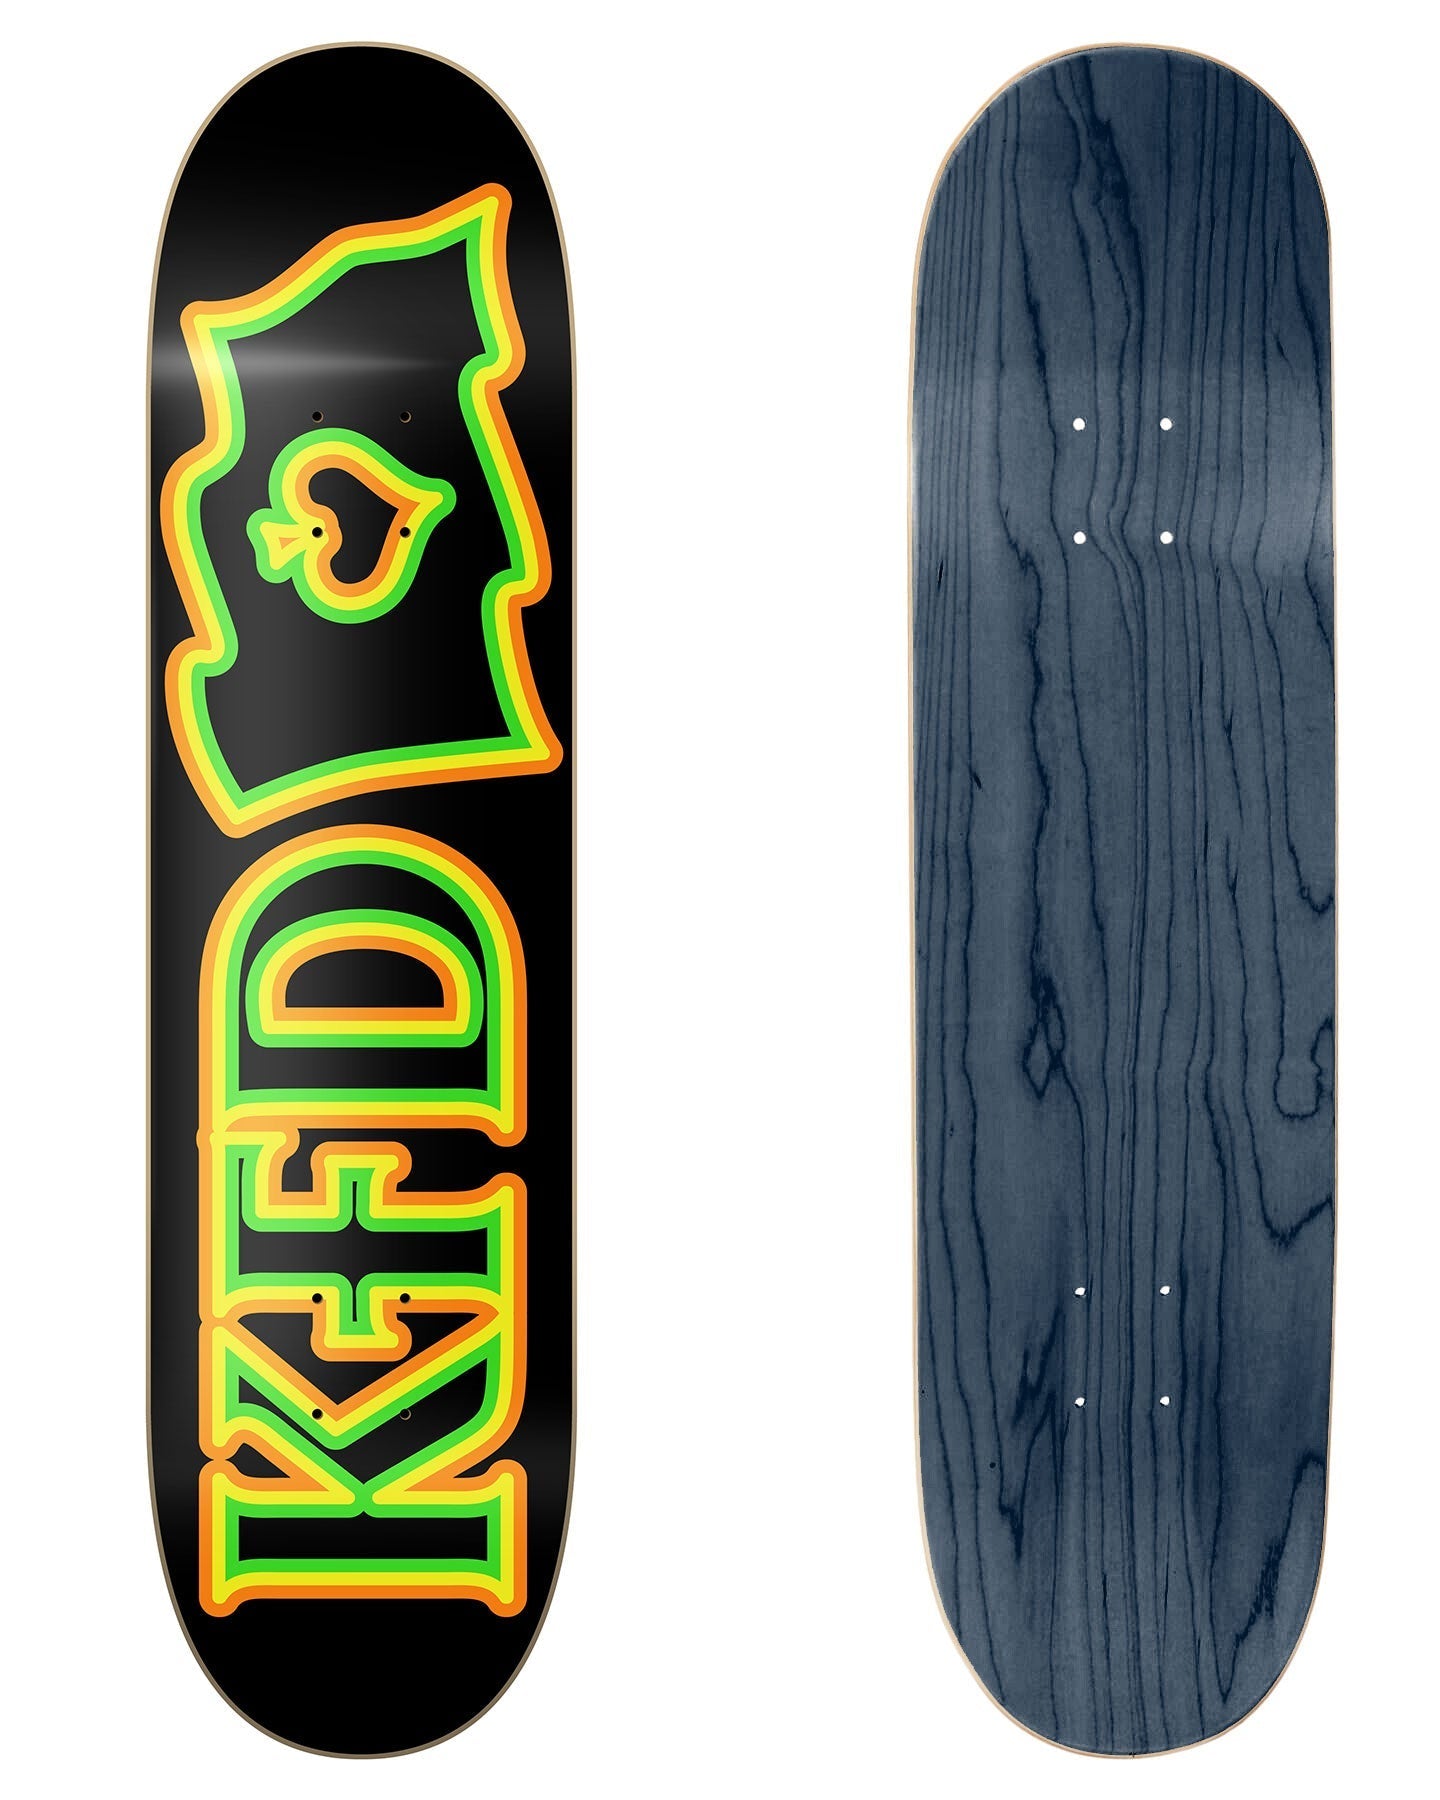 KFD Skateboards Logo Deck "Flagship Chill" in 8.25" bottom graphic and deck top